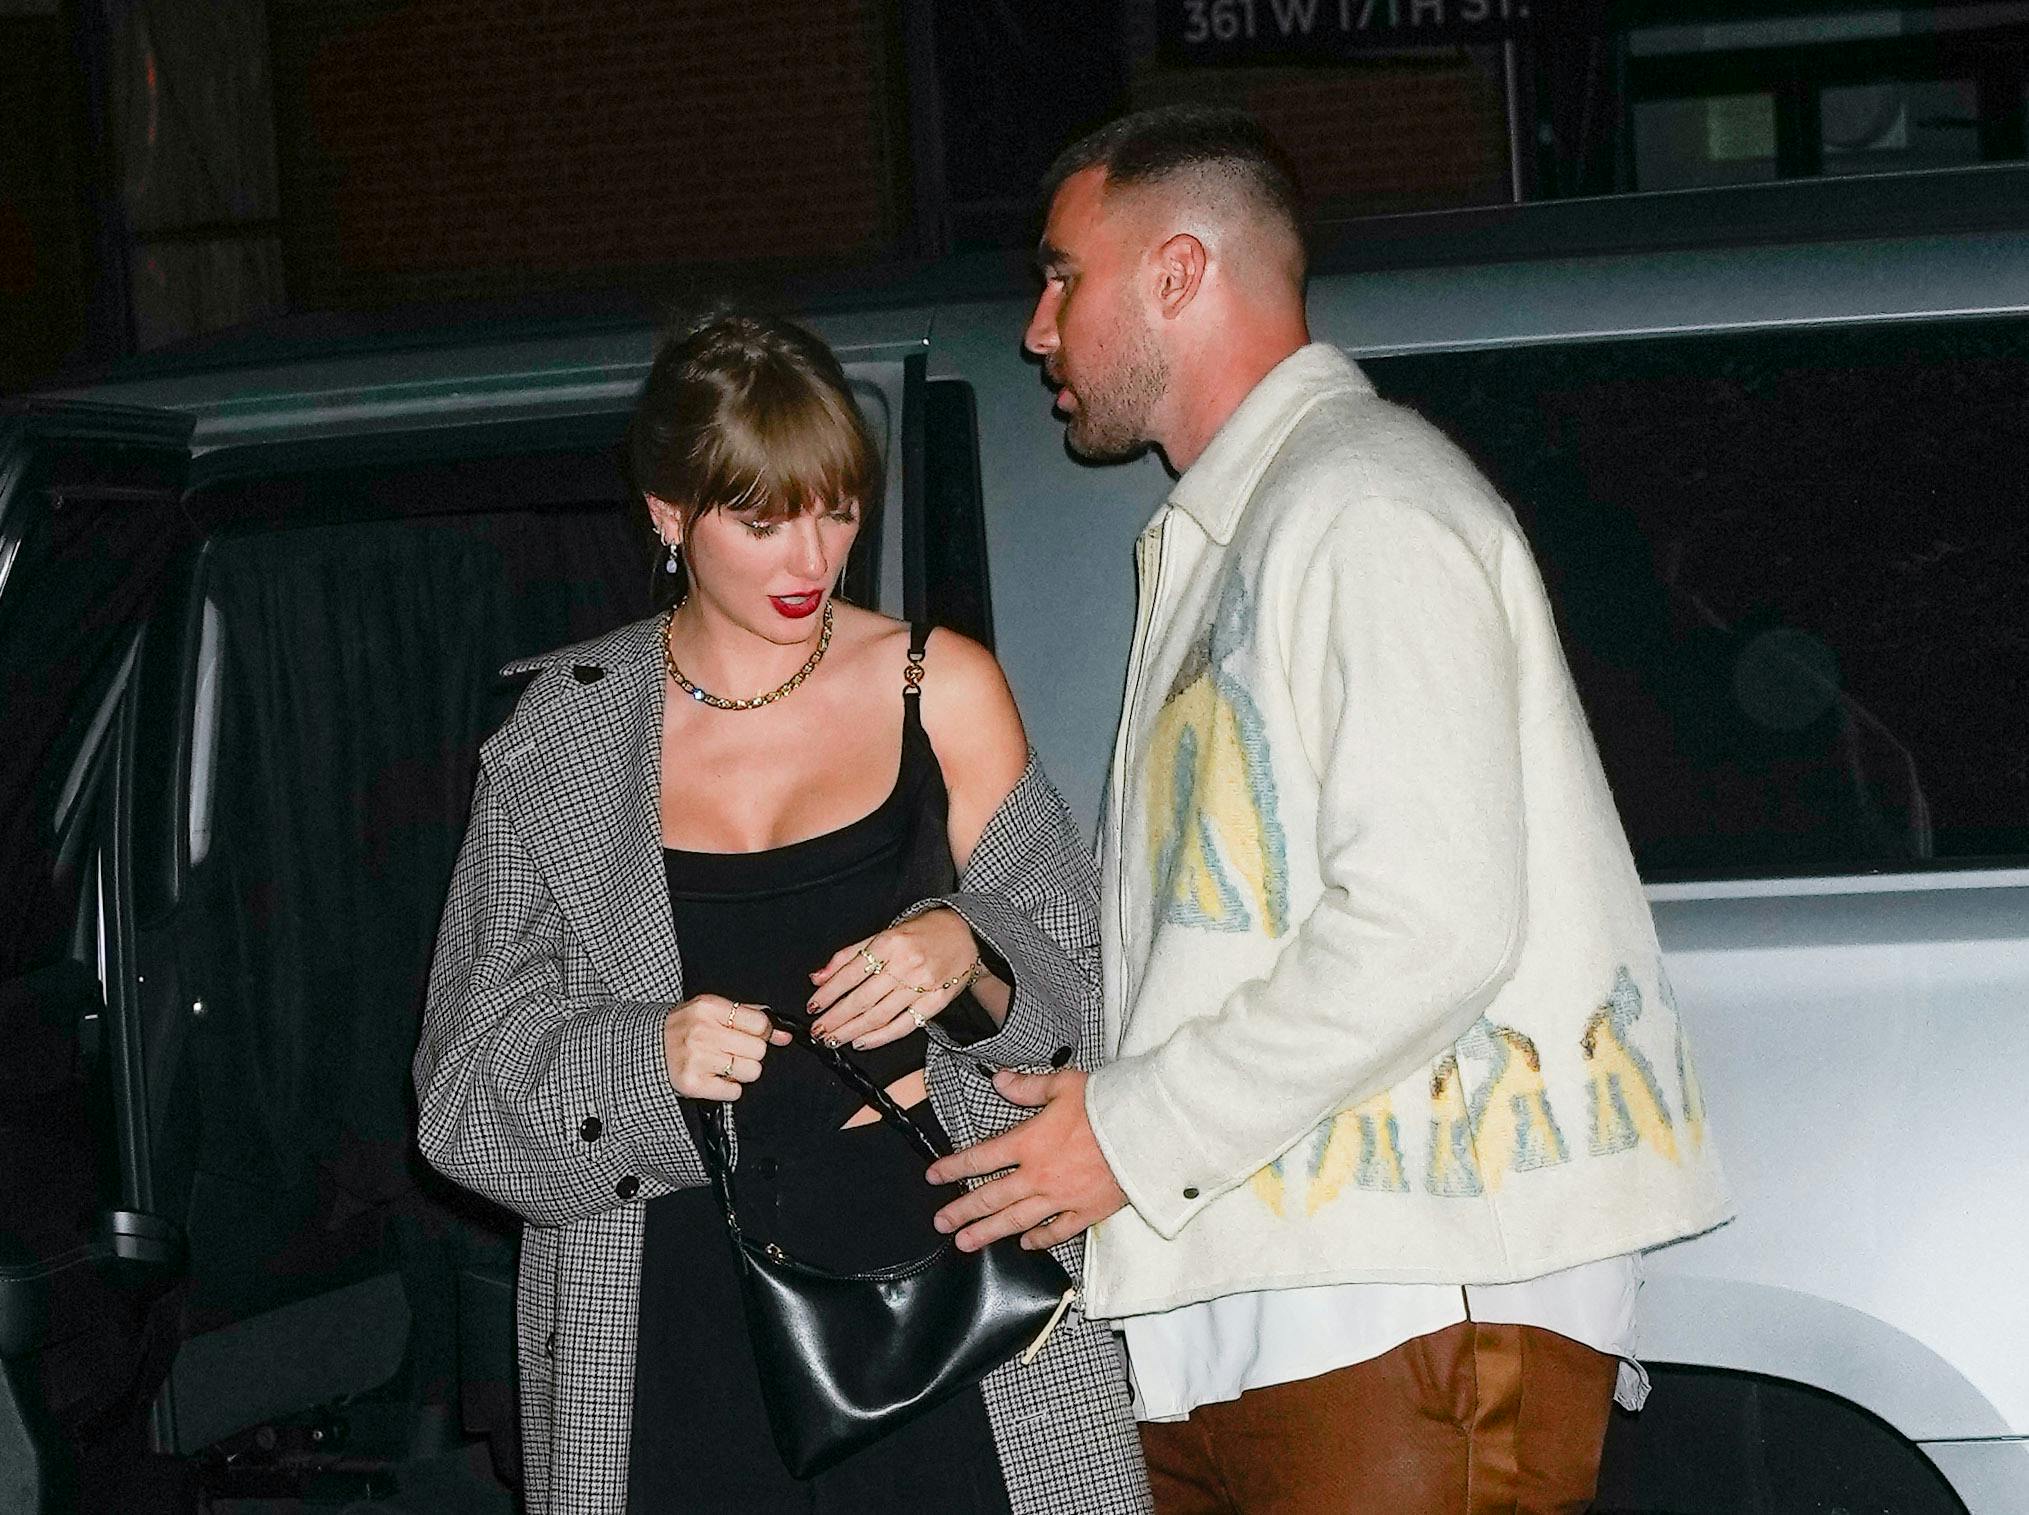 Taylor Swift and Travis Kelce attend the SNL afterparty in New York. 15 Oct 2023 Pictured: Taylor Swift, Travis Kelce. Photo credit: MEGA TheMegaAgency.com +1 888 505 6342 (Mega Agency TagID: MEGA1046369_001.jpg) [Photo via Mega Agency]